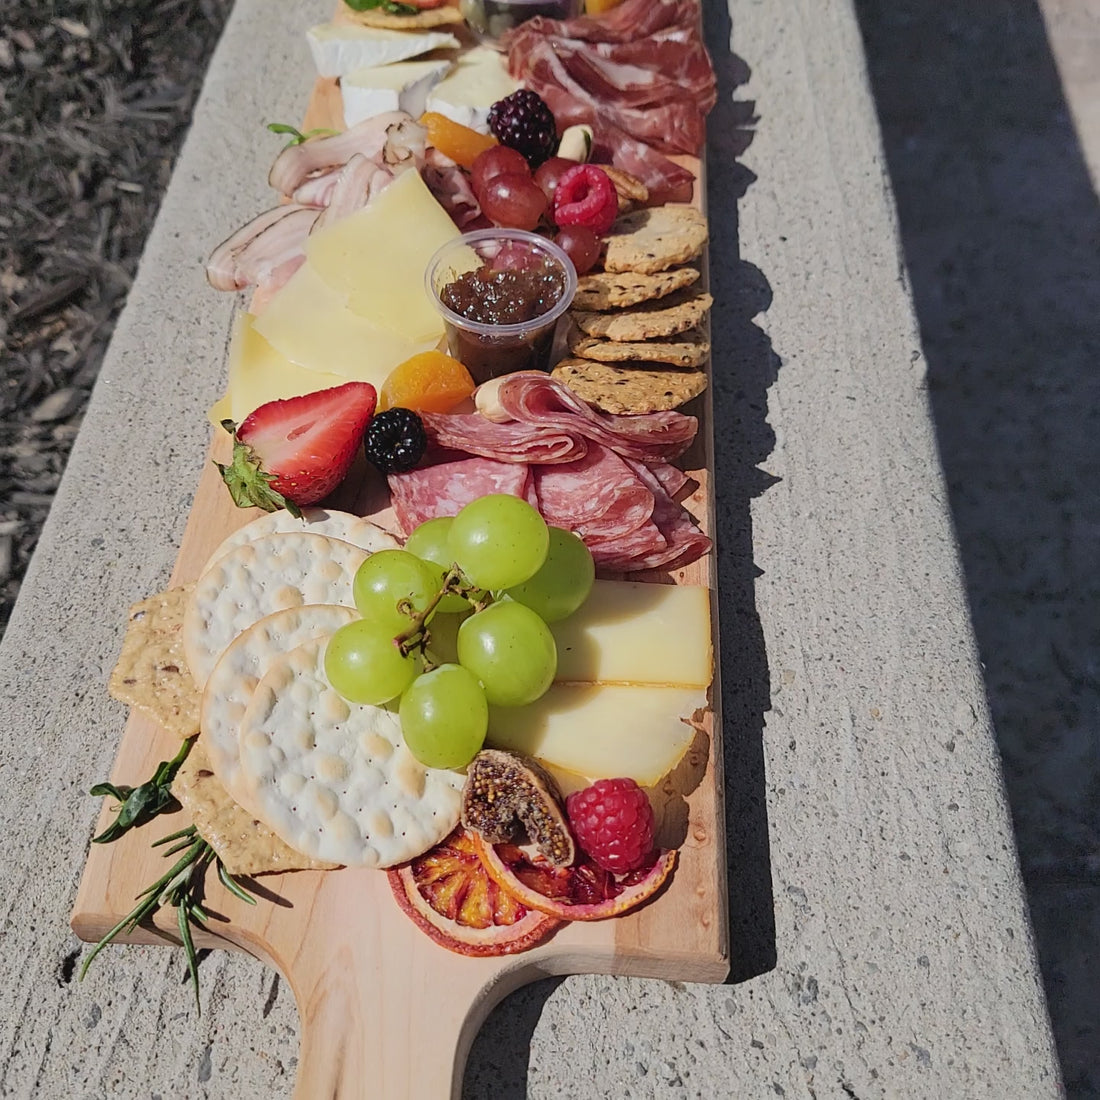 Charcuterie Box to Go! MEDIUM - pick up and same day Ottawa Area Only delivery  -extra cost for delivery, must be ordered before 2pm for same day)